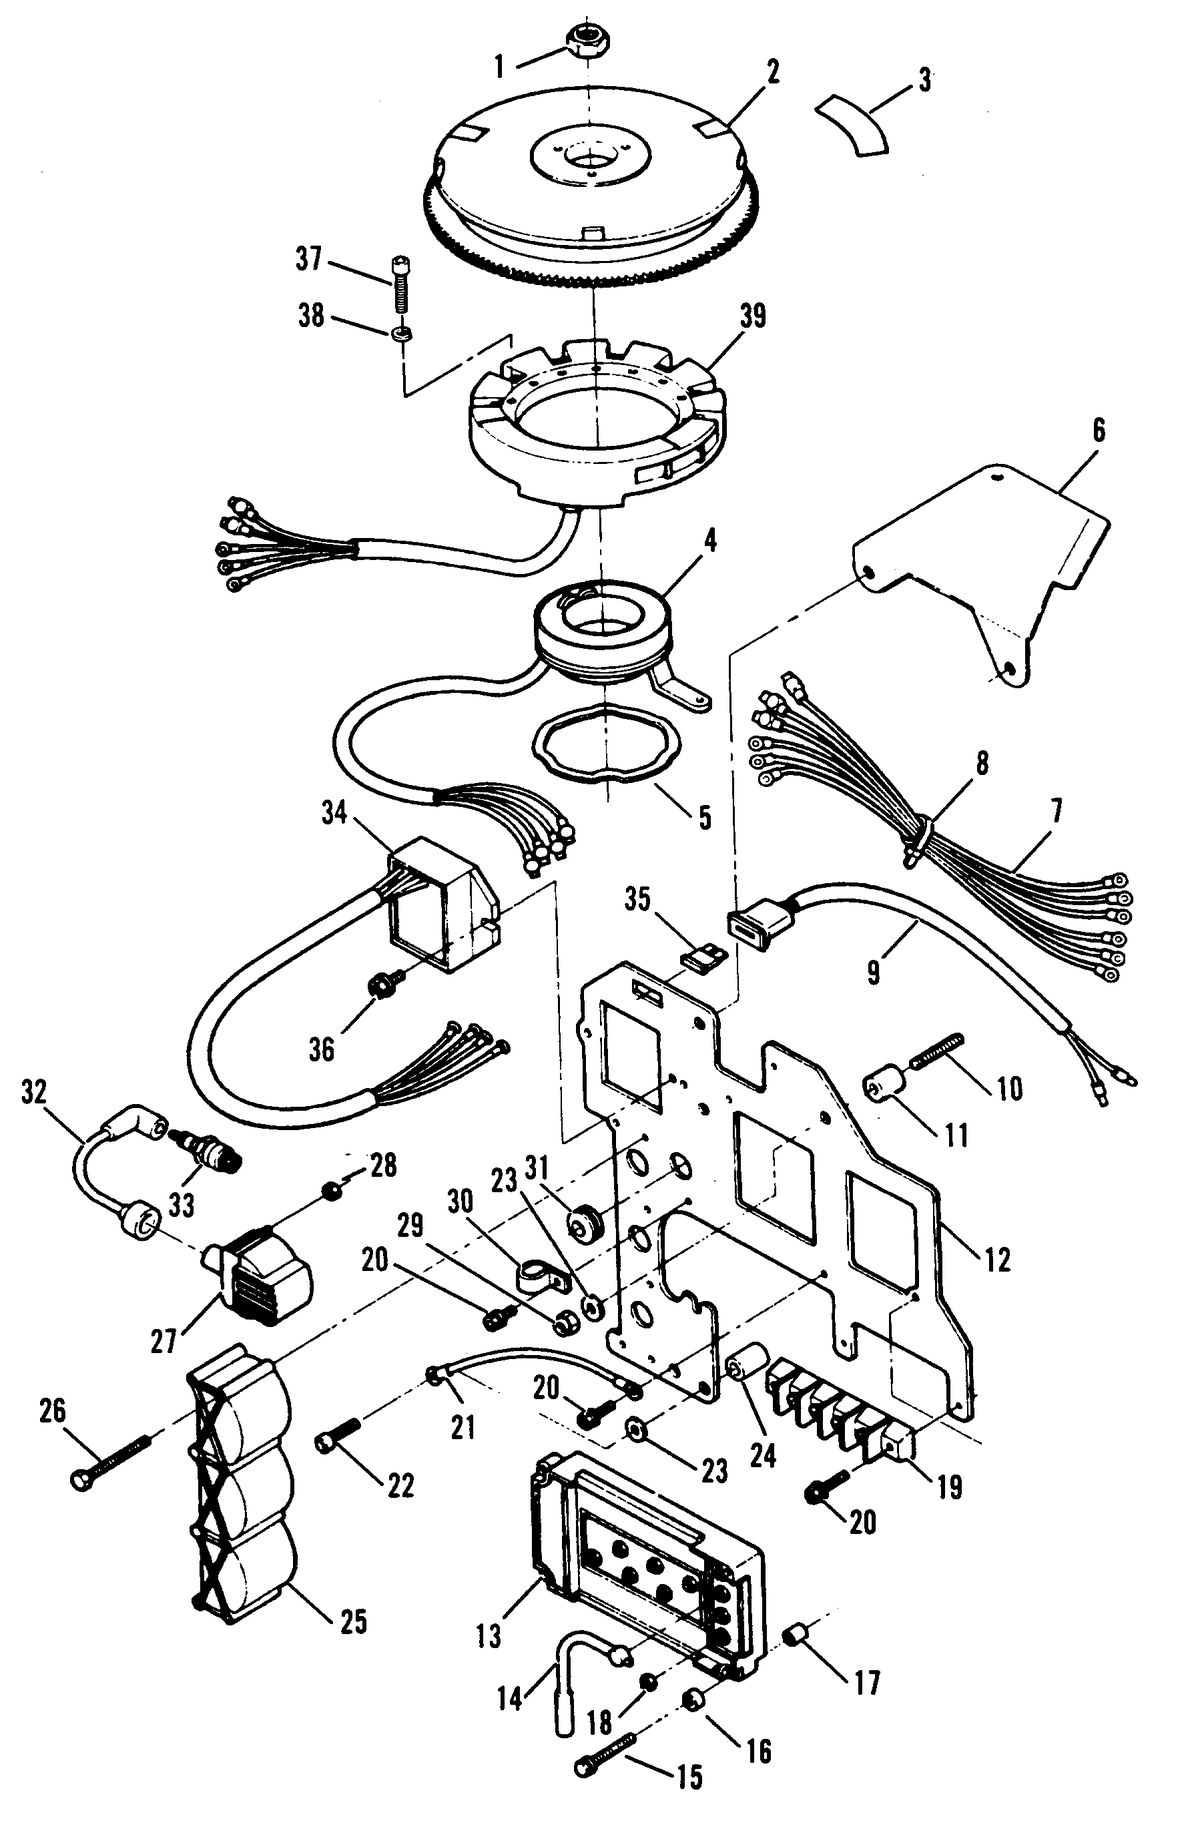 FORCE 70 H.P. IGNITION COMPONENTS (1991B - 1992C)